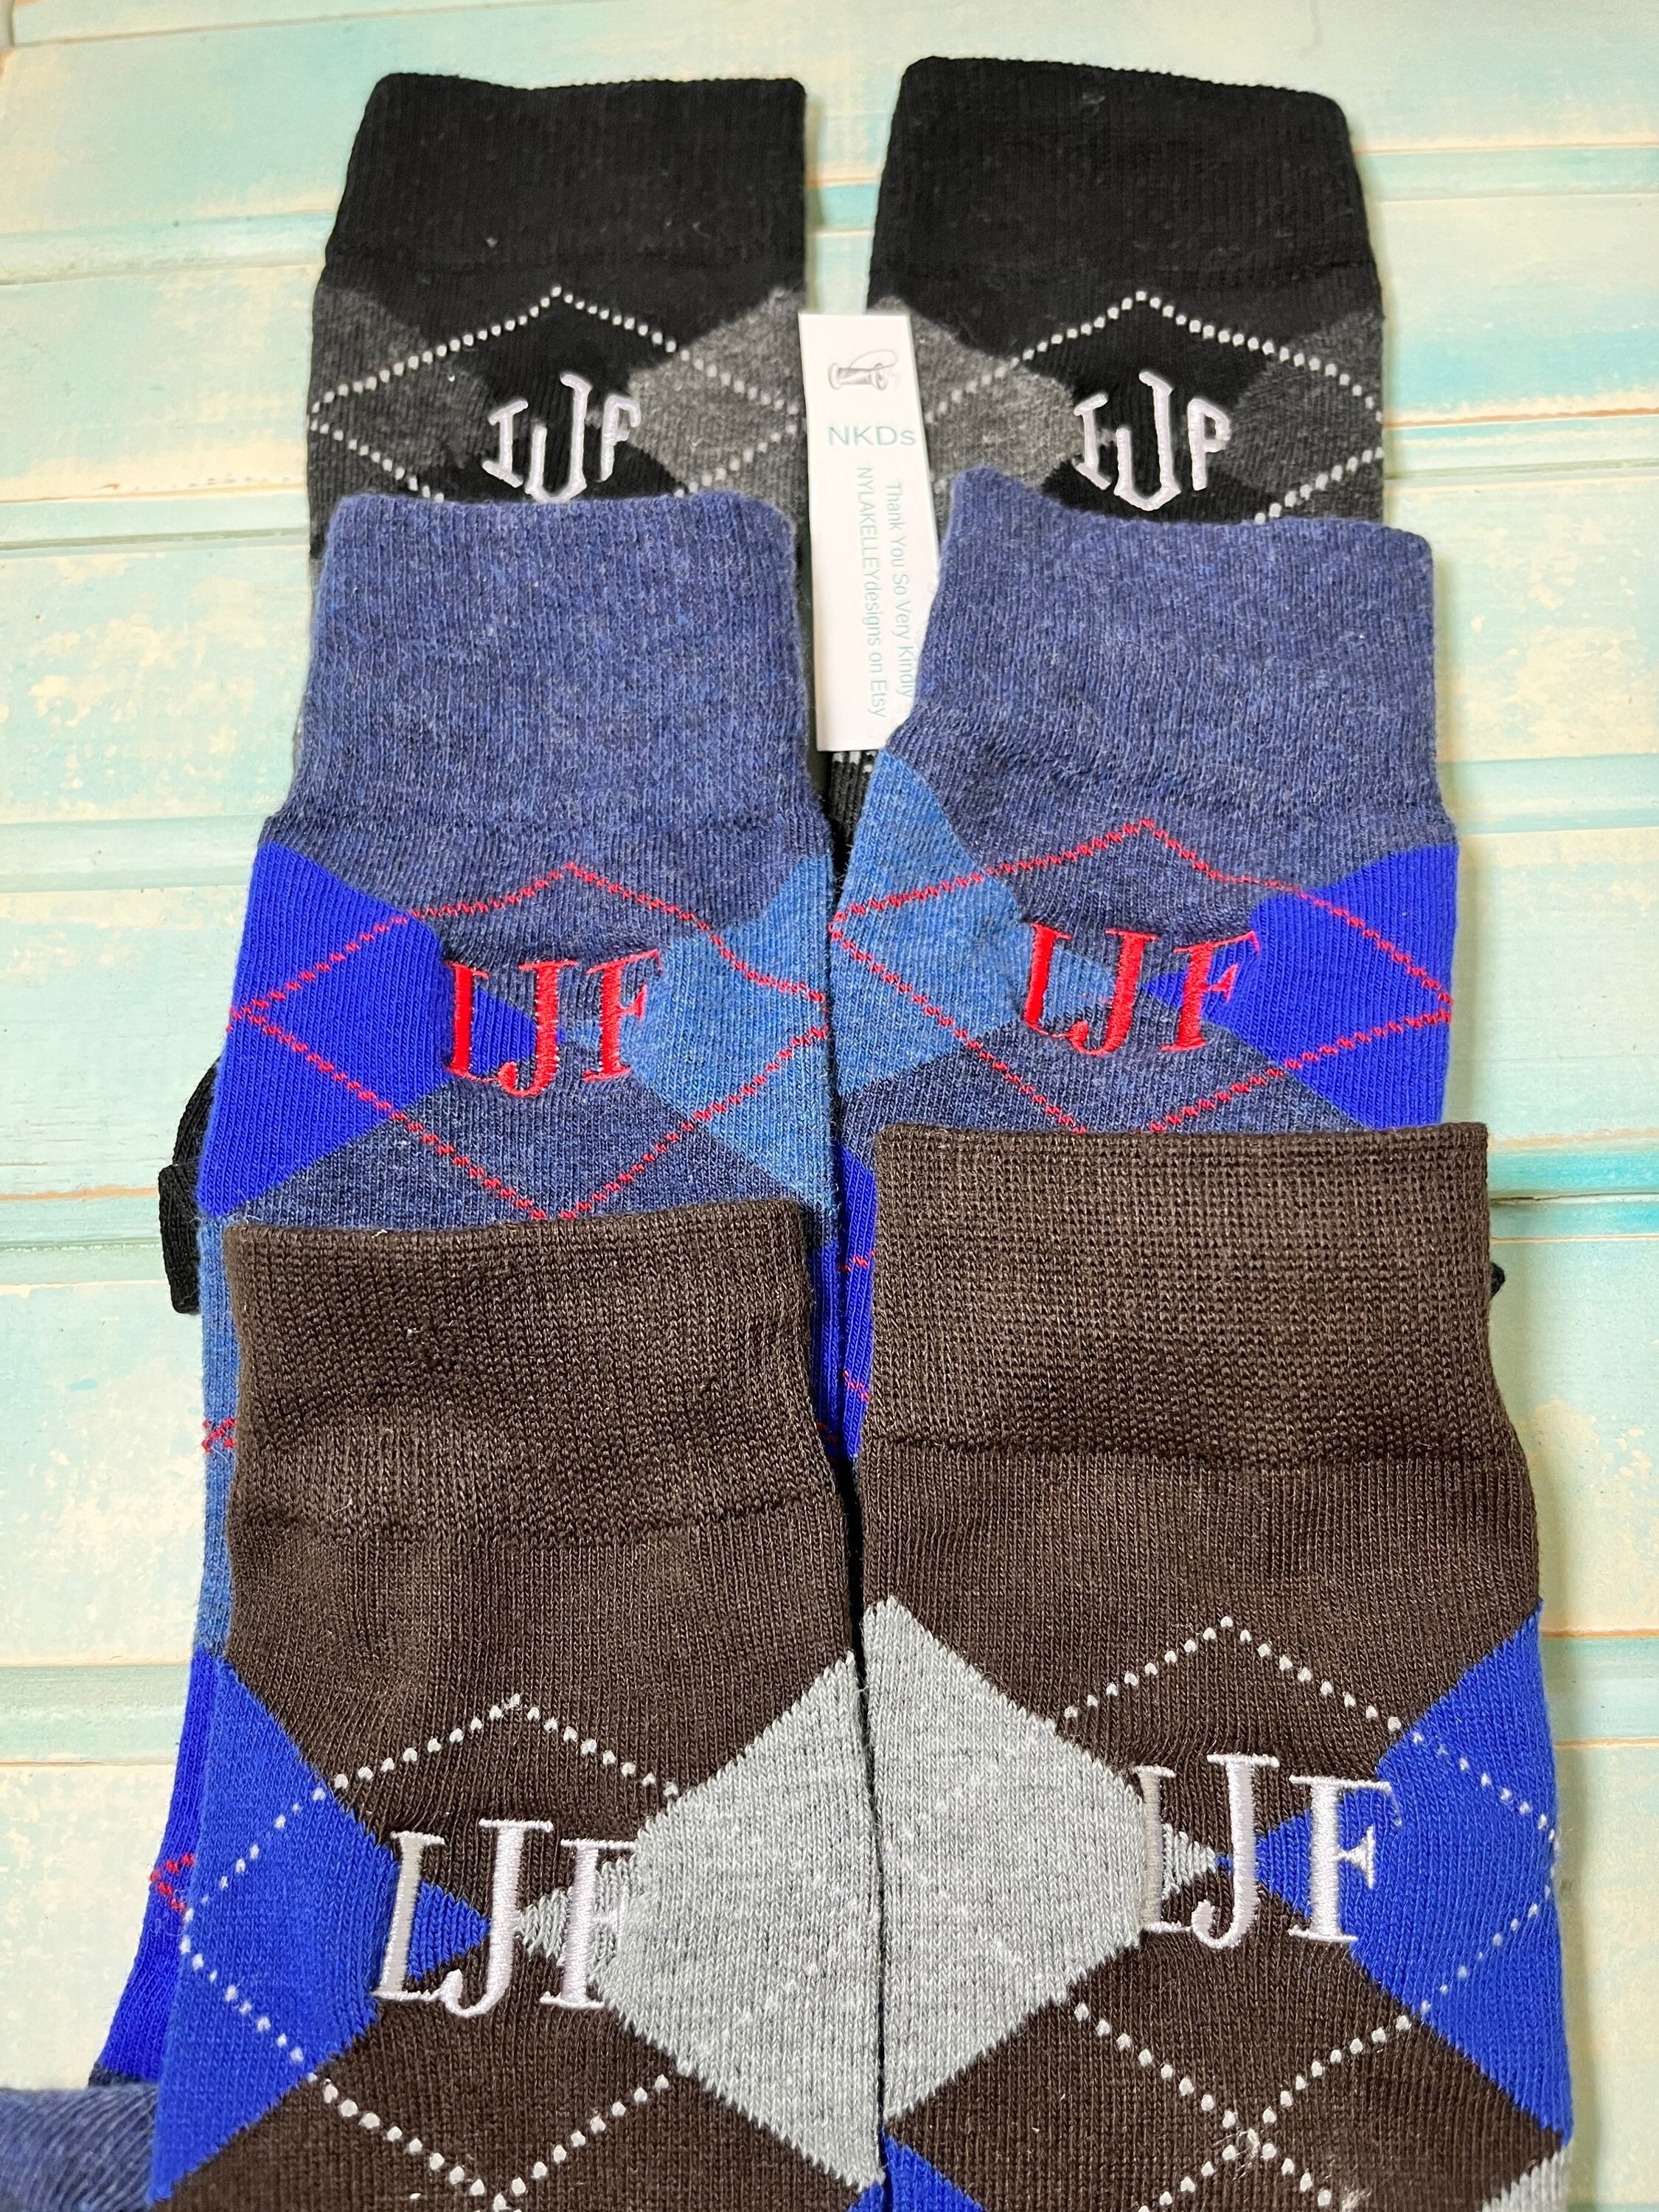 1pr New Men's Yellow Black Gray Argyle Cotton Monogrammed Dress Socks Embroidered initials Wedding Party Groom Men Gift Size 10-13 Fits 6-12